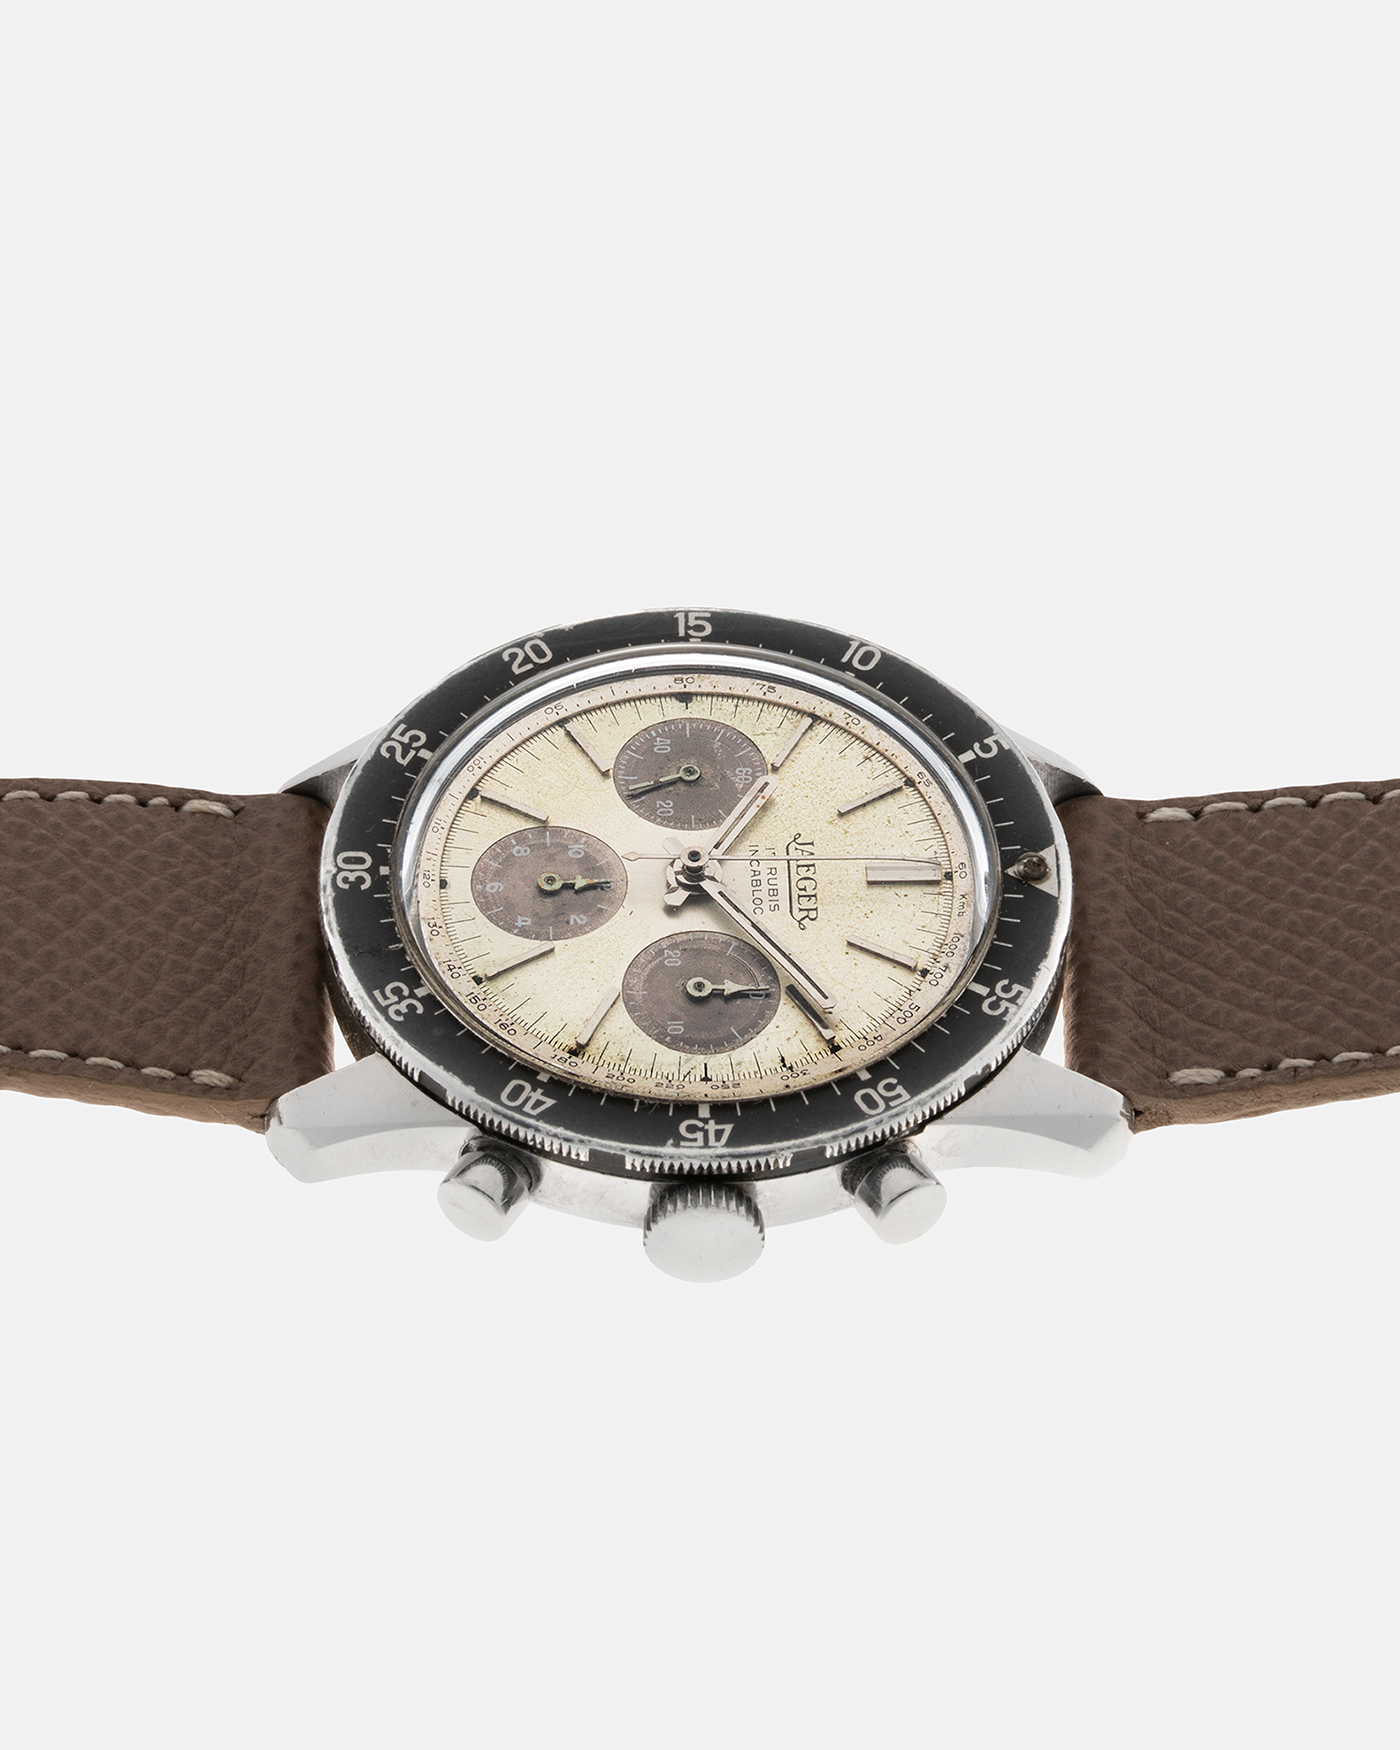 Brand: Jaeger Year: 1968 Model: 4 ATM Reference Number: E.13001 Serial Number: 442745 Material: Stainless Steel Movement: Valjoux Cal. 72, Manual-Winding Case Diameter: 41mm Lug Width: 22mm Strap: Generic Taupe Leather Strap